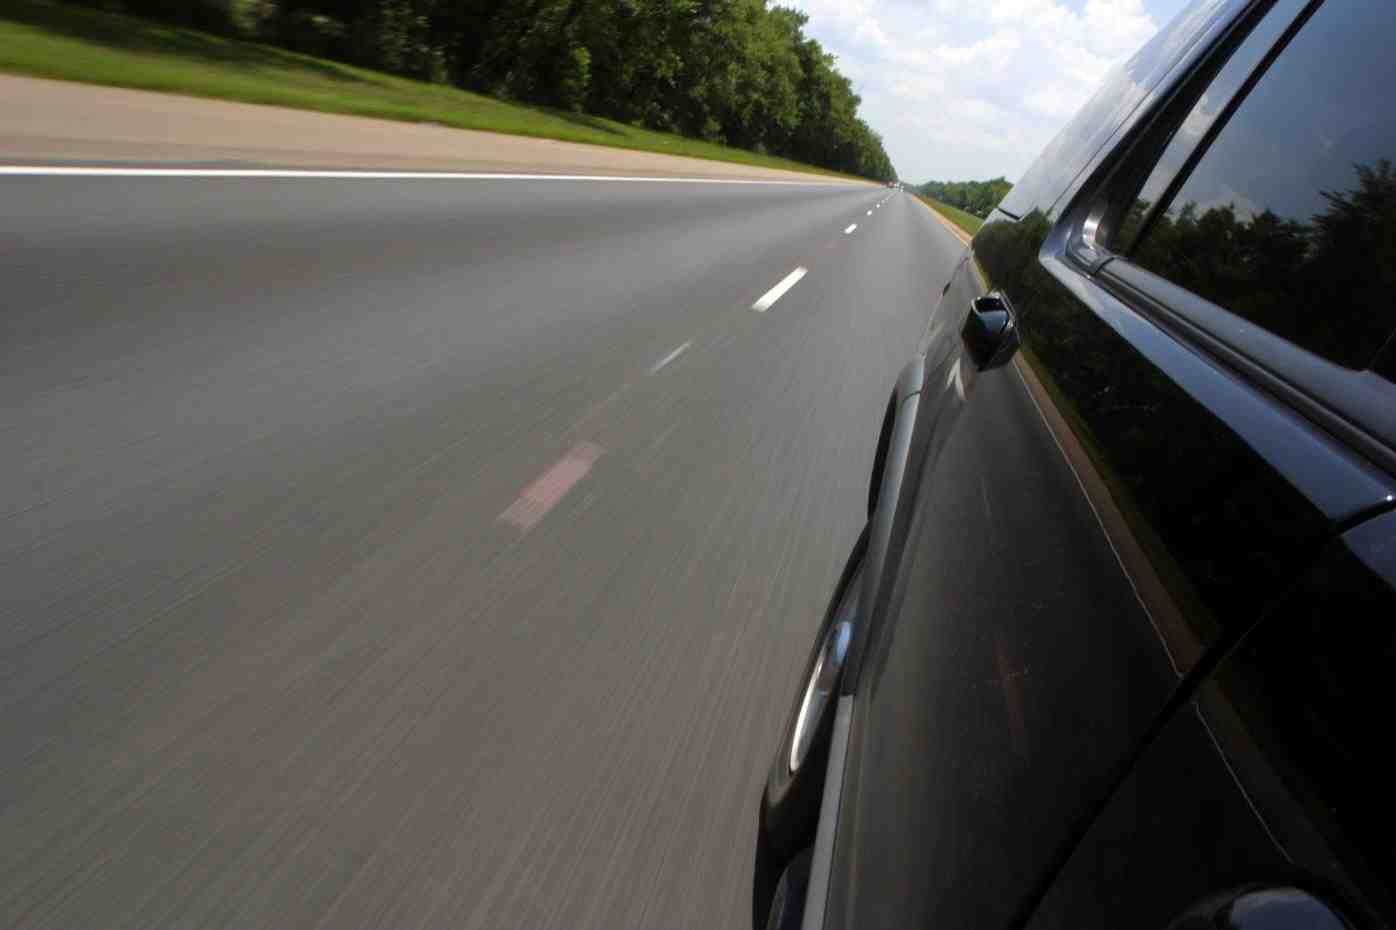 Shreveport car insurance is up 25 percent this year, according to the study